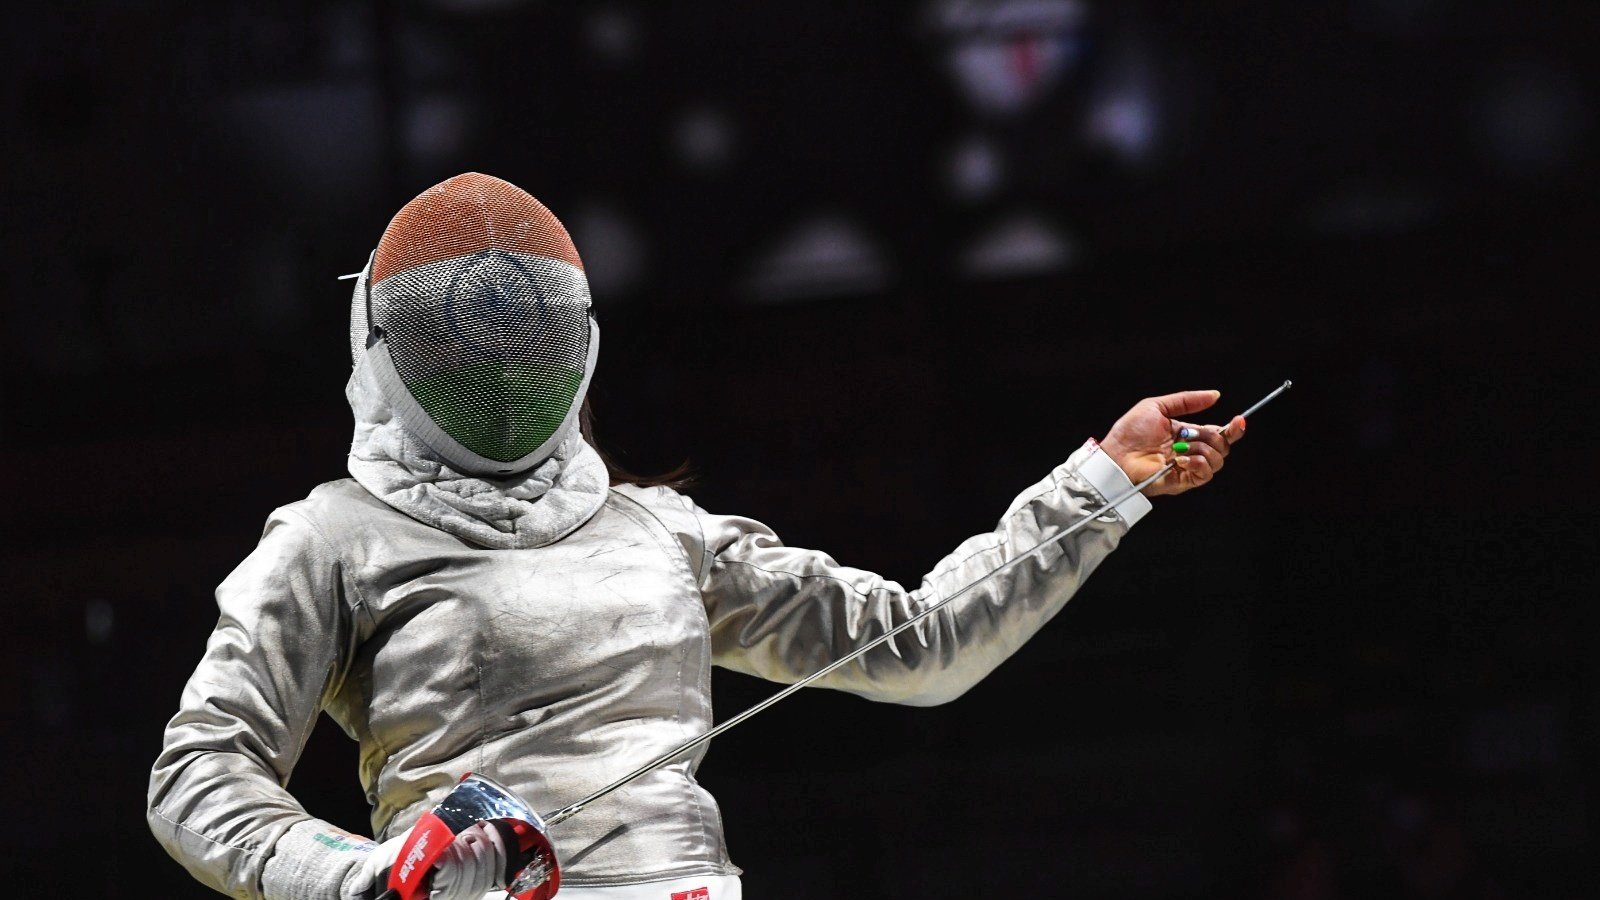 Bhavani Devi Wins Gold Medal at Commonwealth Fencing Championship 2022